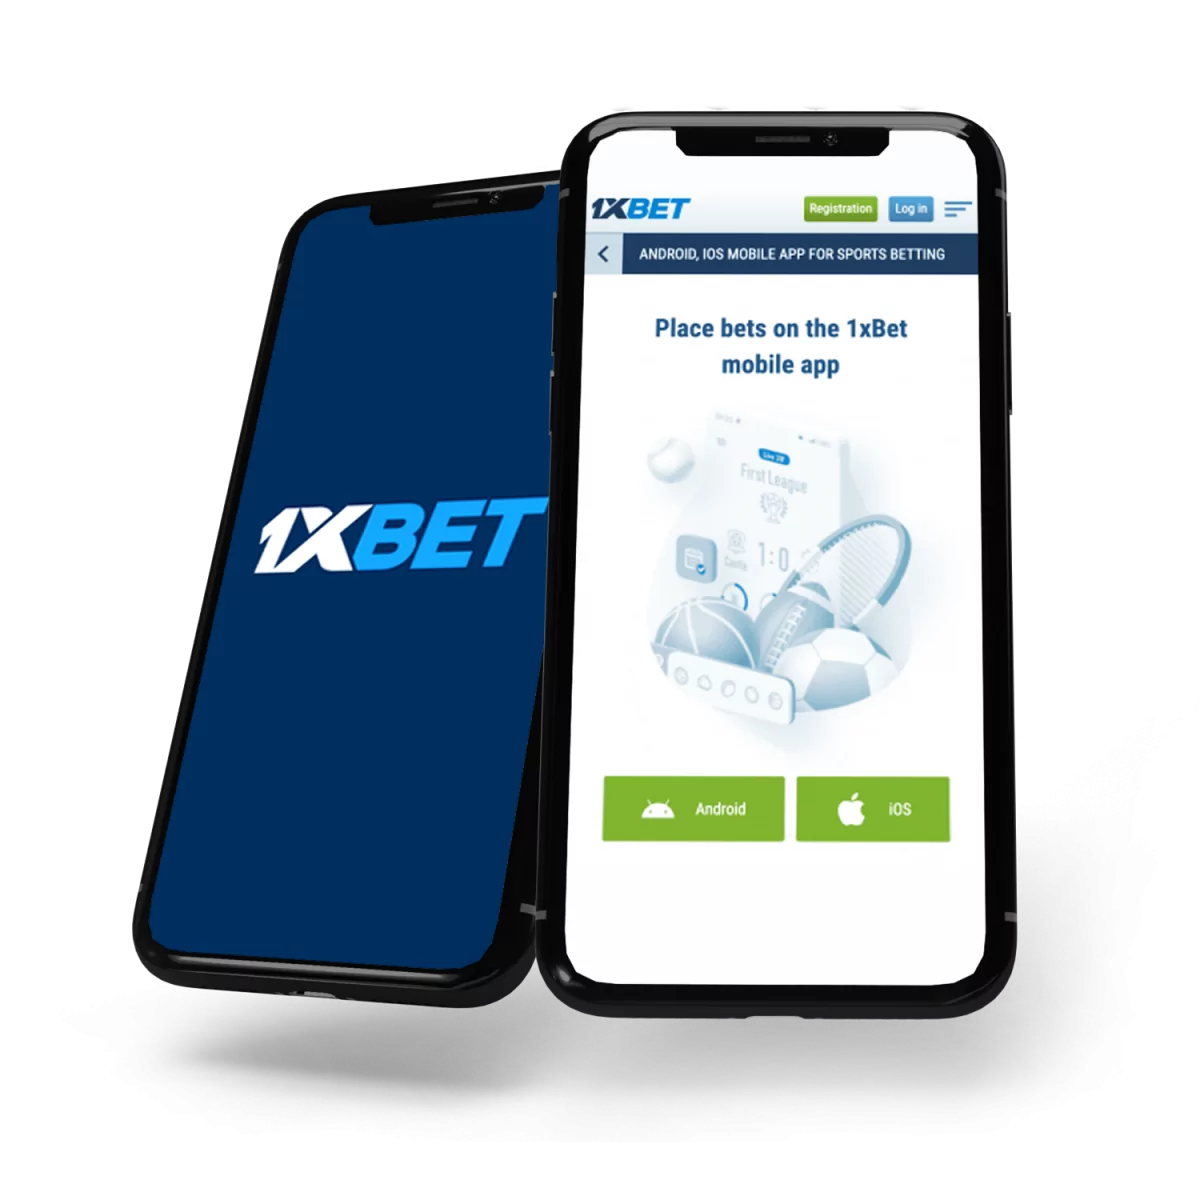 How To Save Money with 1xbet bet login?